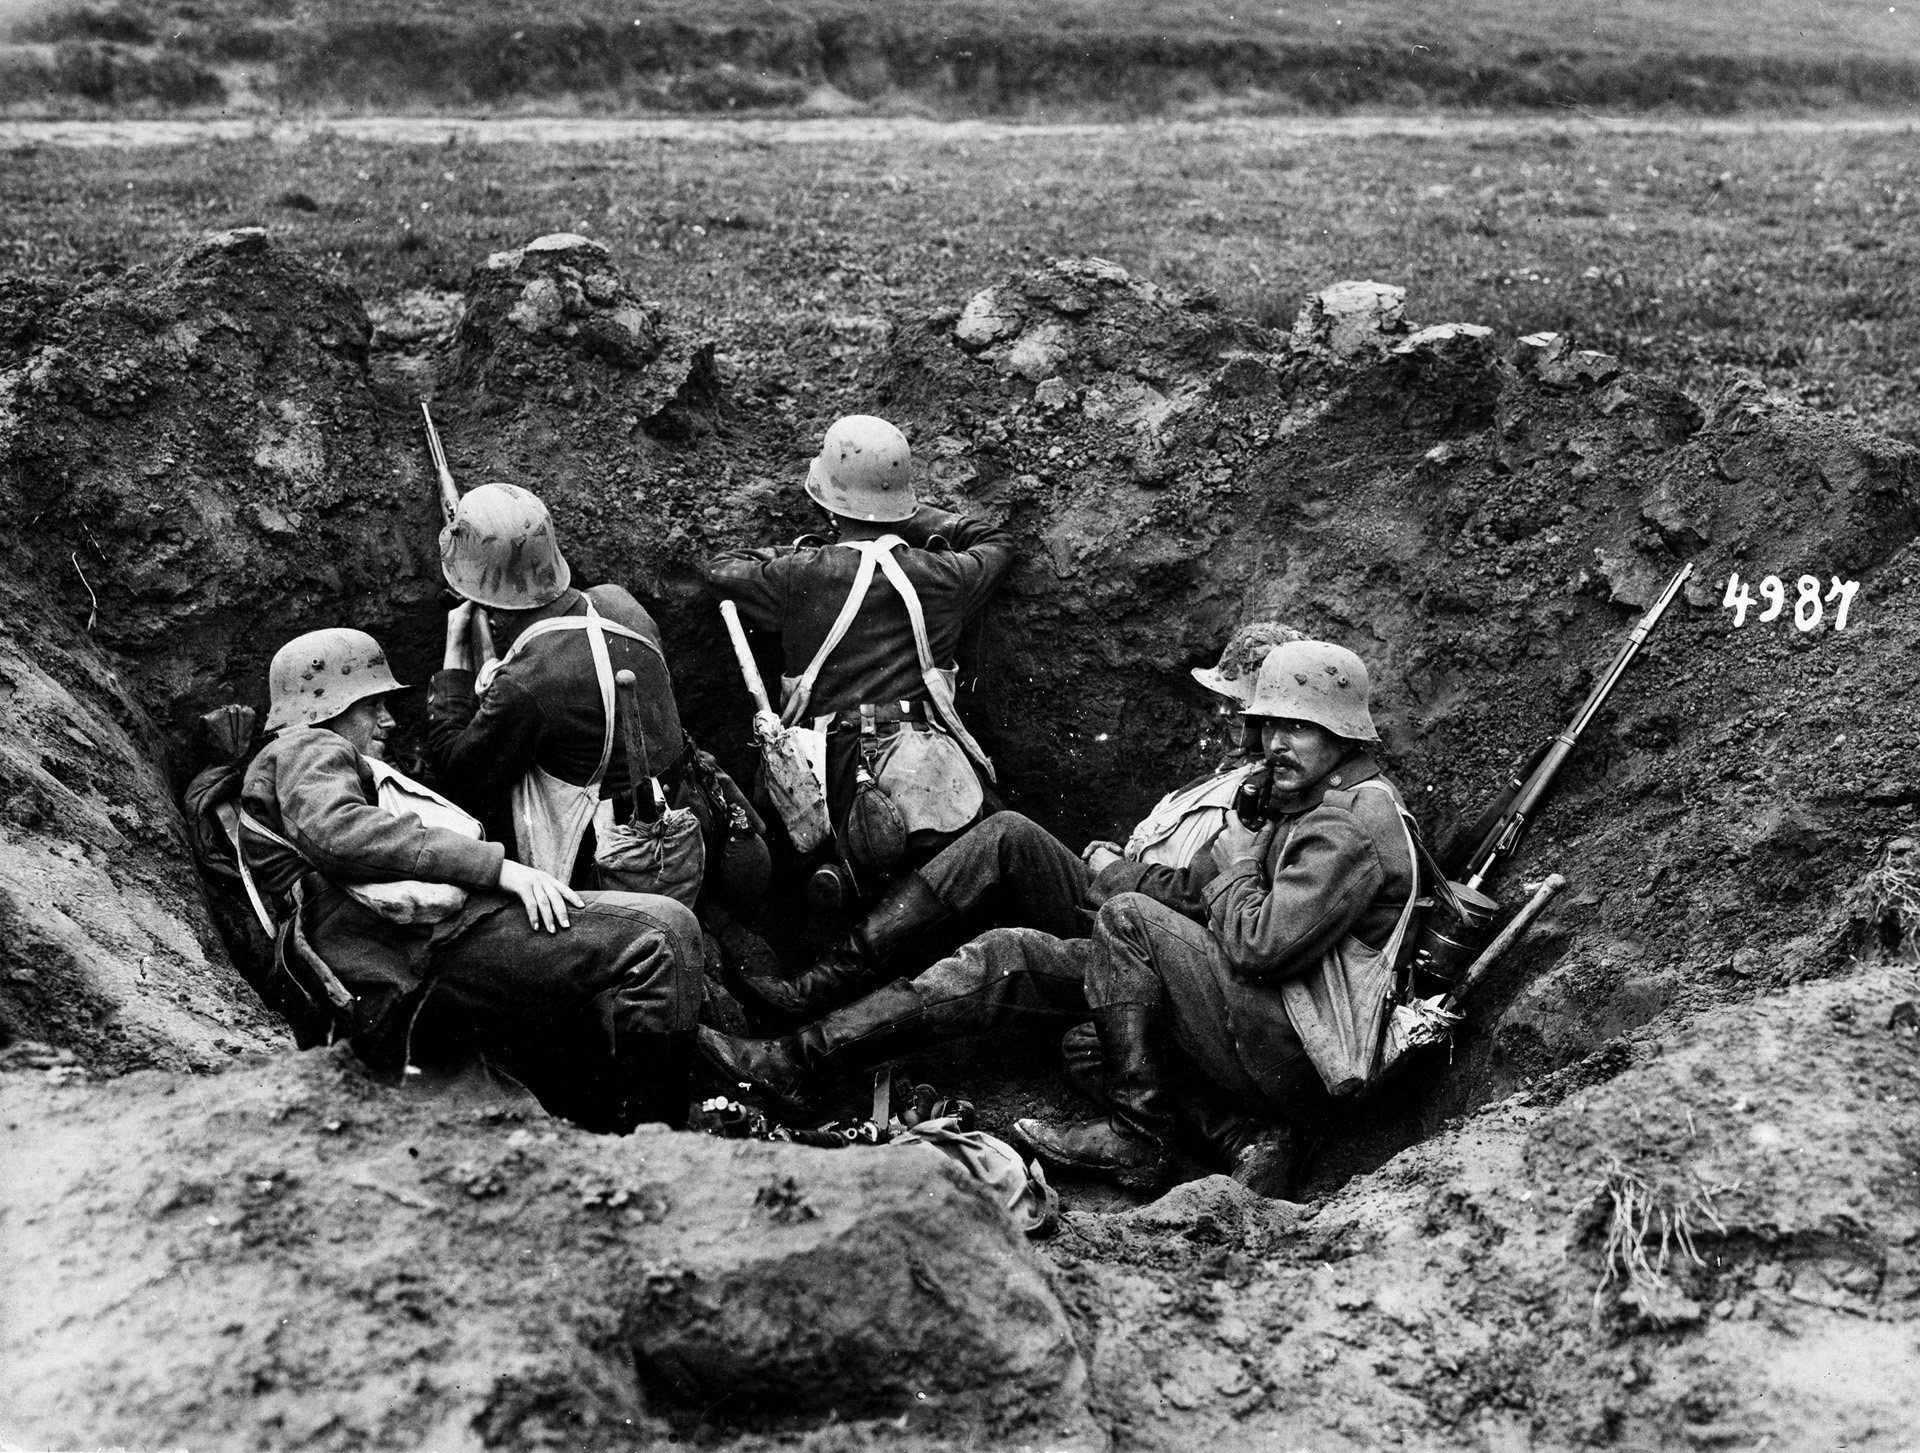 Germans take cover in a shell crater during a counterattack. The Germans held troops in reserve for counterattacks that negated the British army's incremental advances.